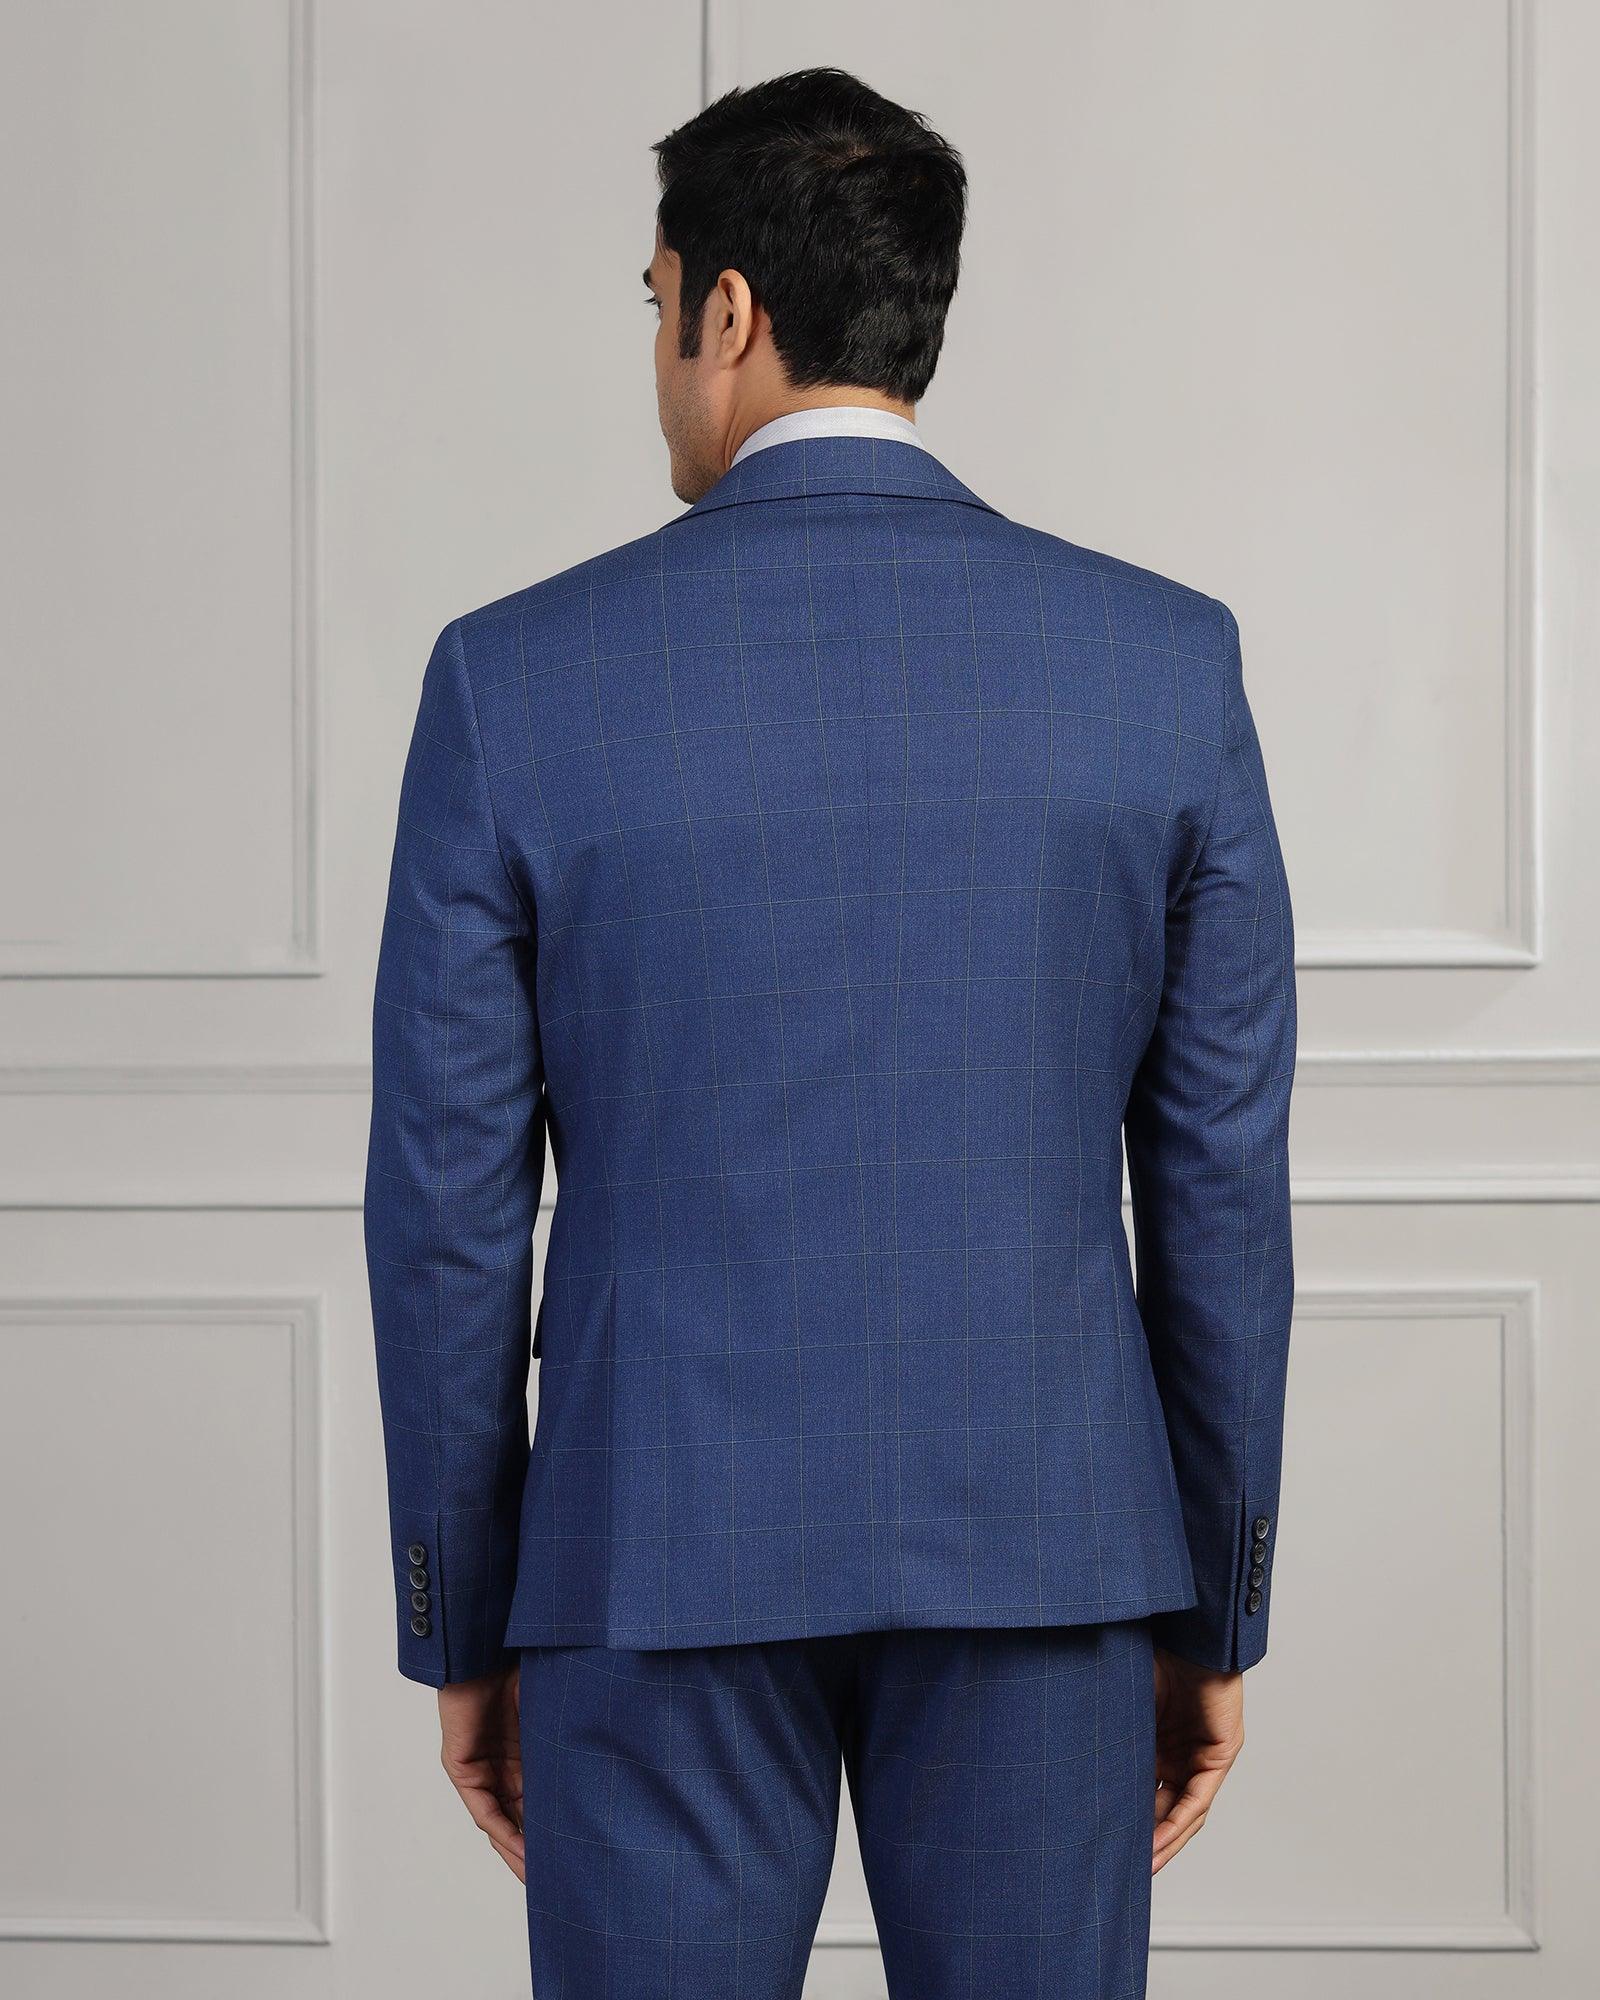 Three Piece Blue Check Formal Suit - Forex